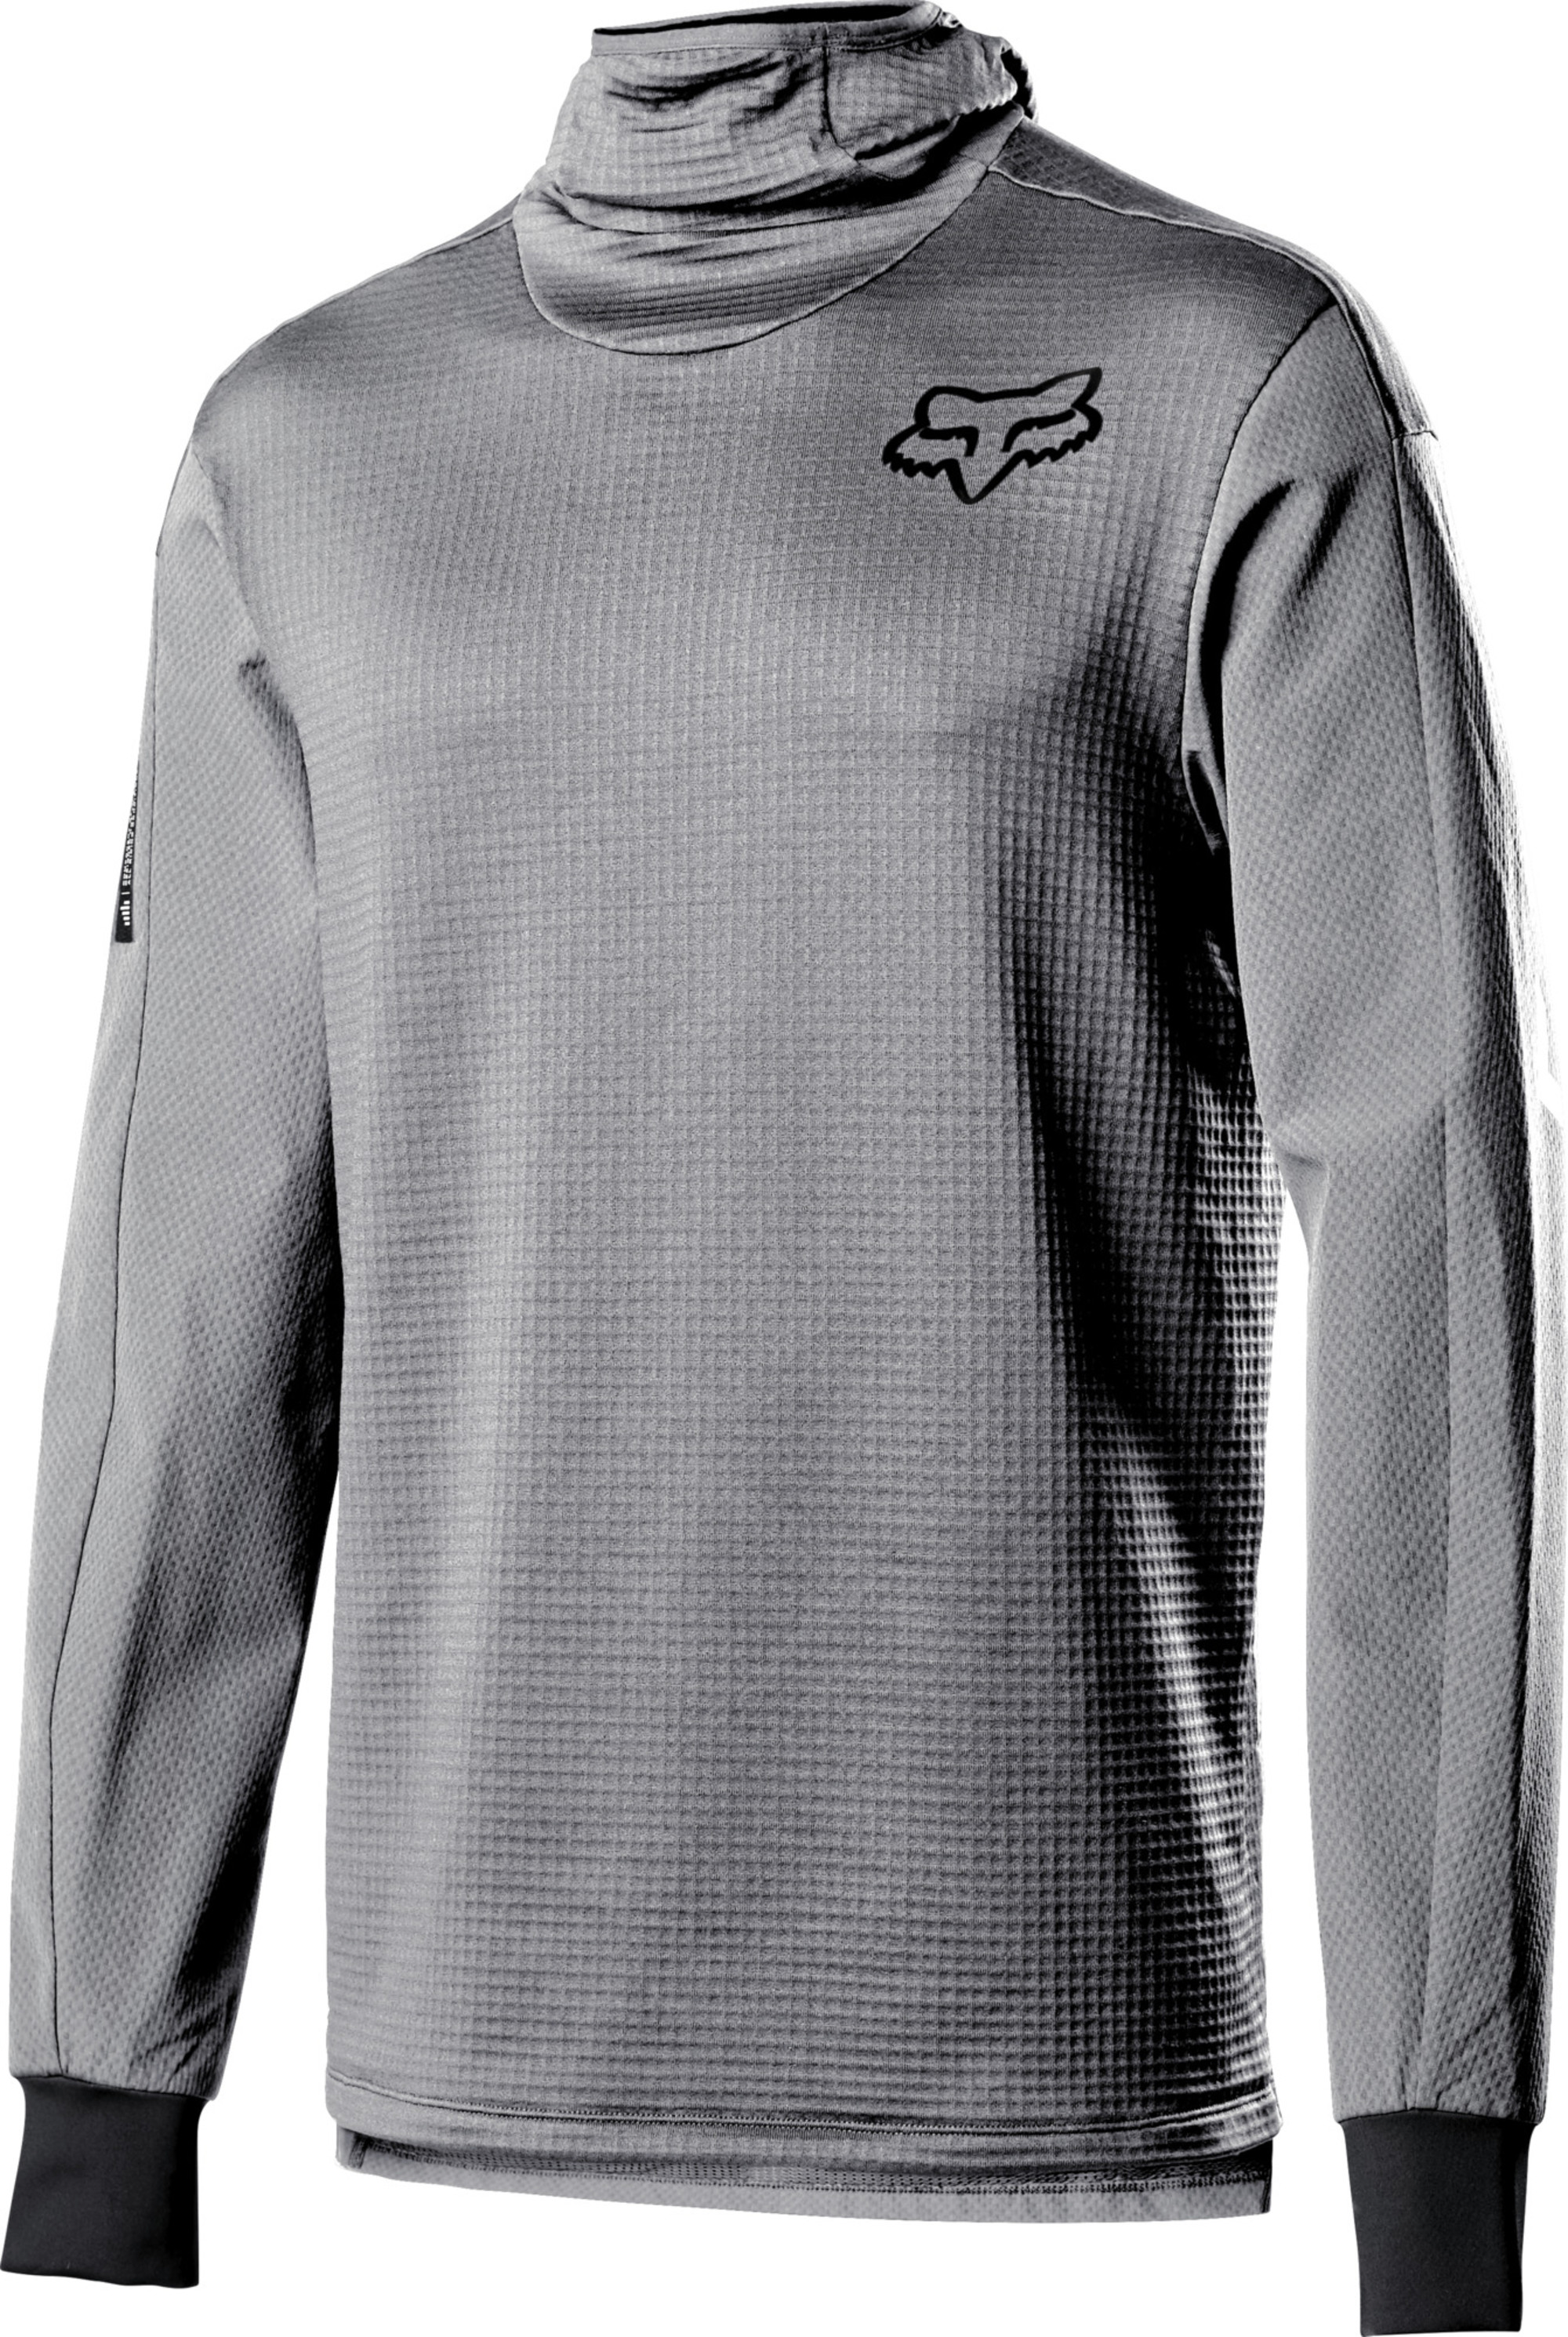 fox racing tops base layers baselayers for men defend thermo hooded